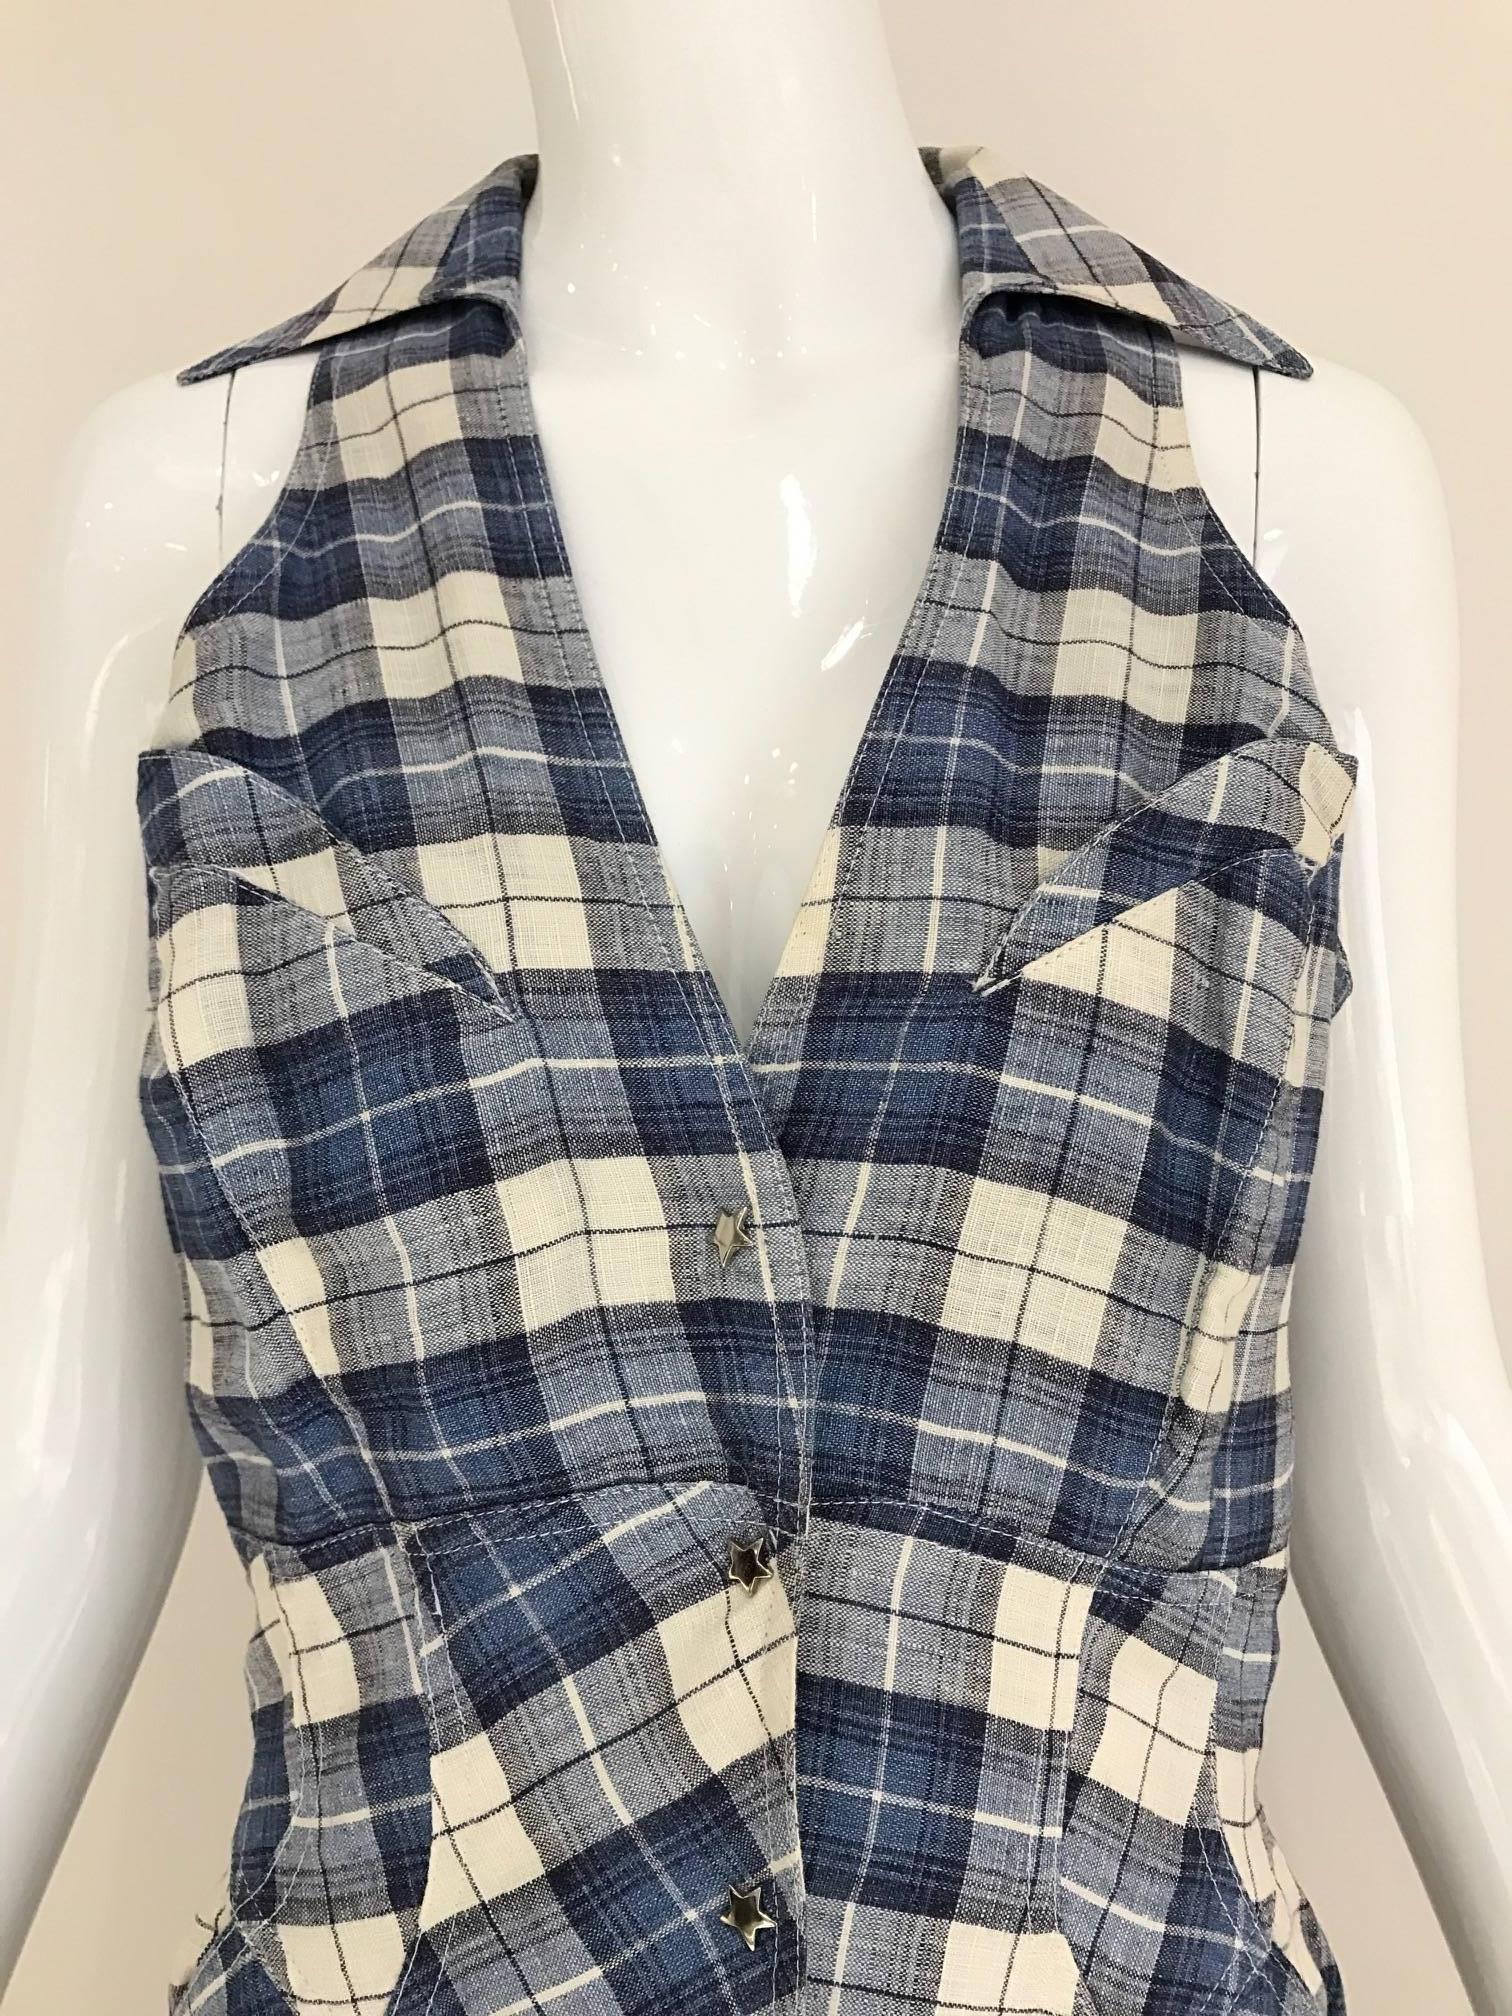 1990s Thierry mugler blue and white plaid cotton summer dress. 
V neck and snap front button.
What a nice summer dress from Mugler! Perfect for Capri vacation! 
Bust: 36 inches/ Waist 28 inches/ Length: 54.5 inches